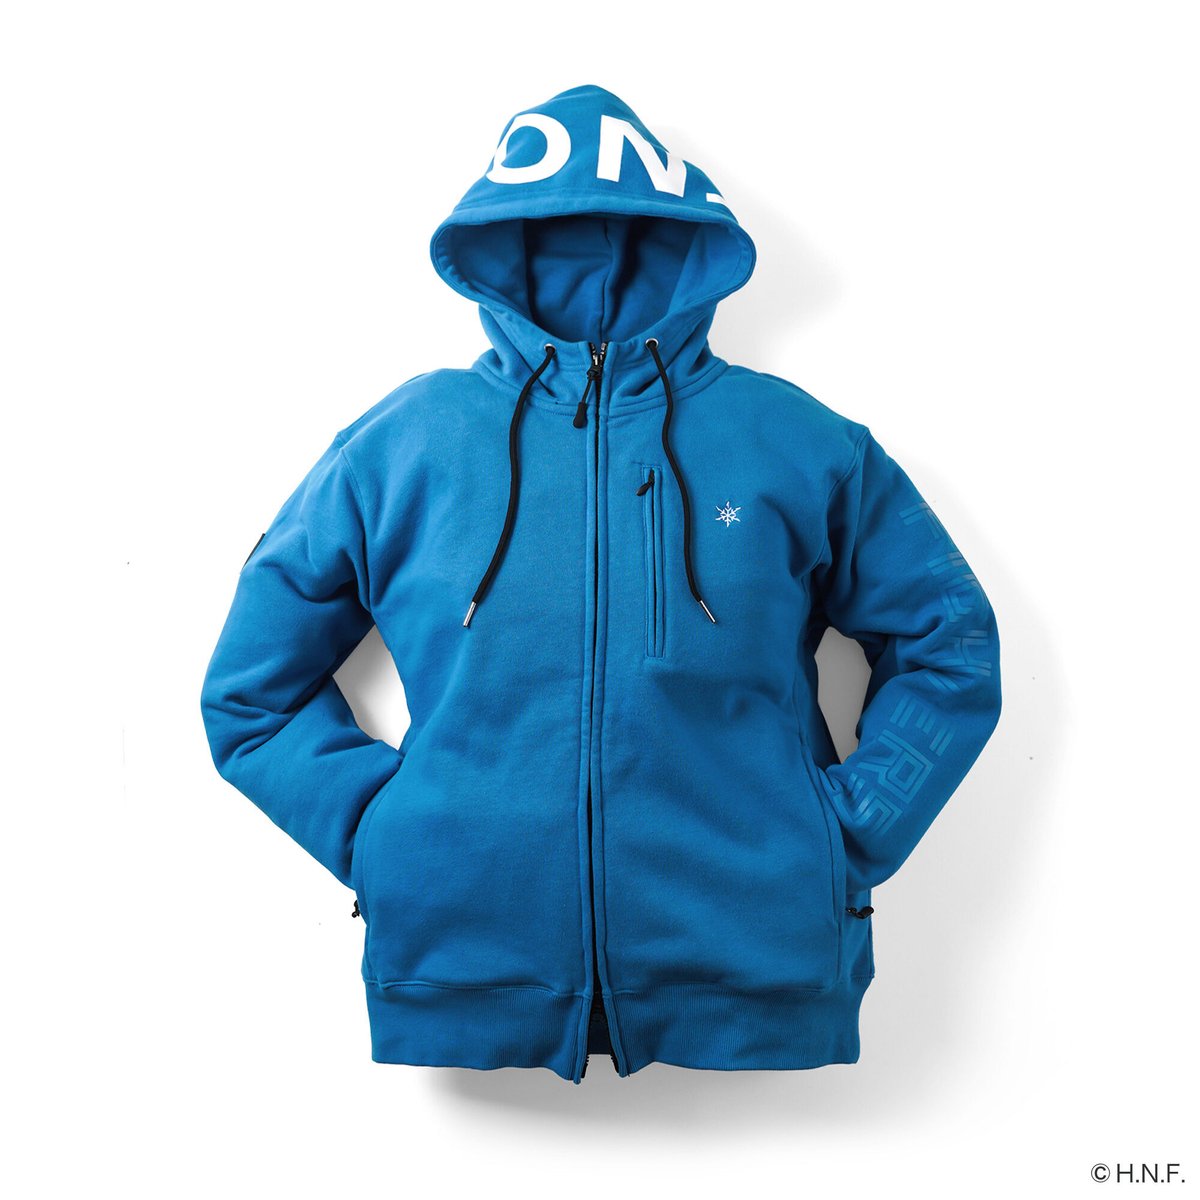 TNOC THE HOODIE ZIPUP YT2 F/MODE / FIGHTERS BLUE